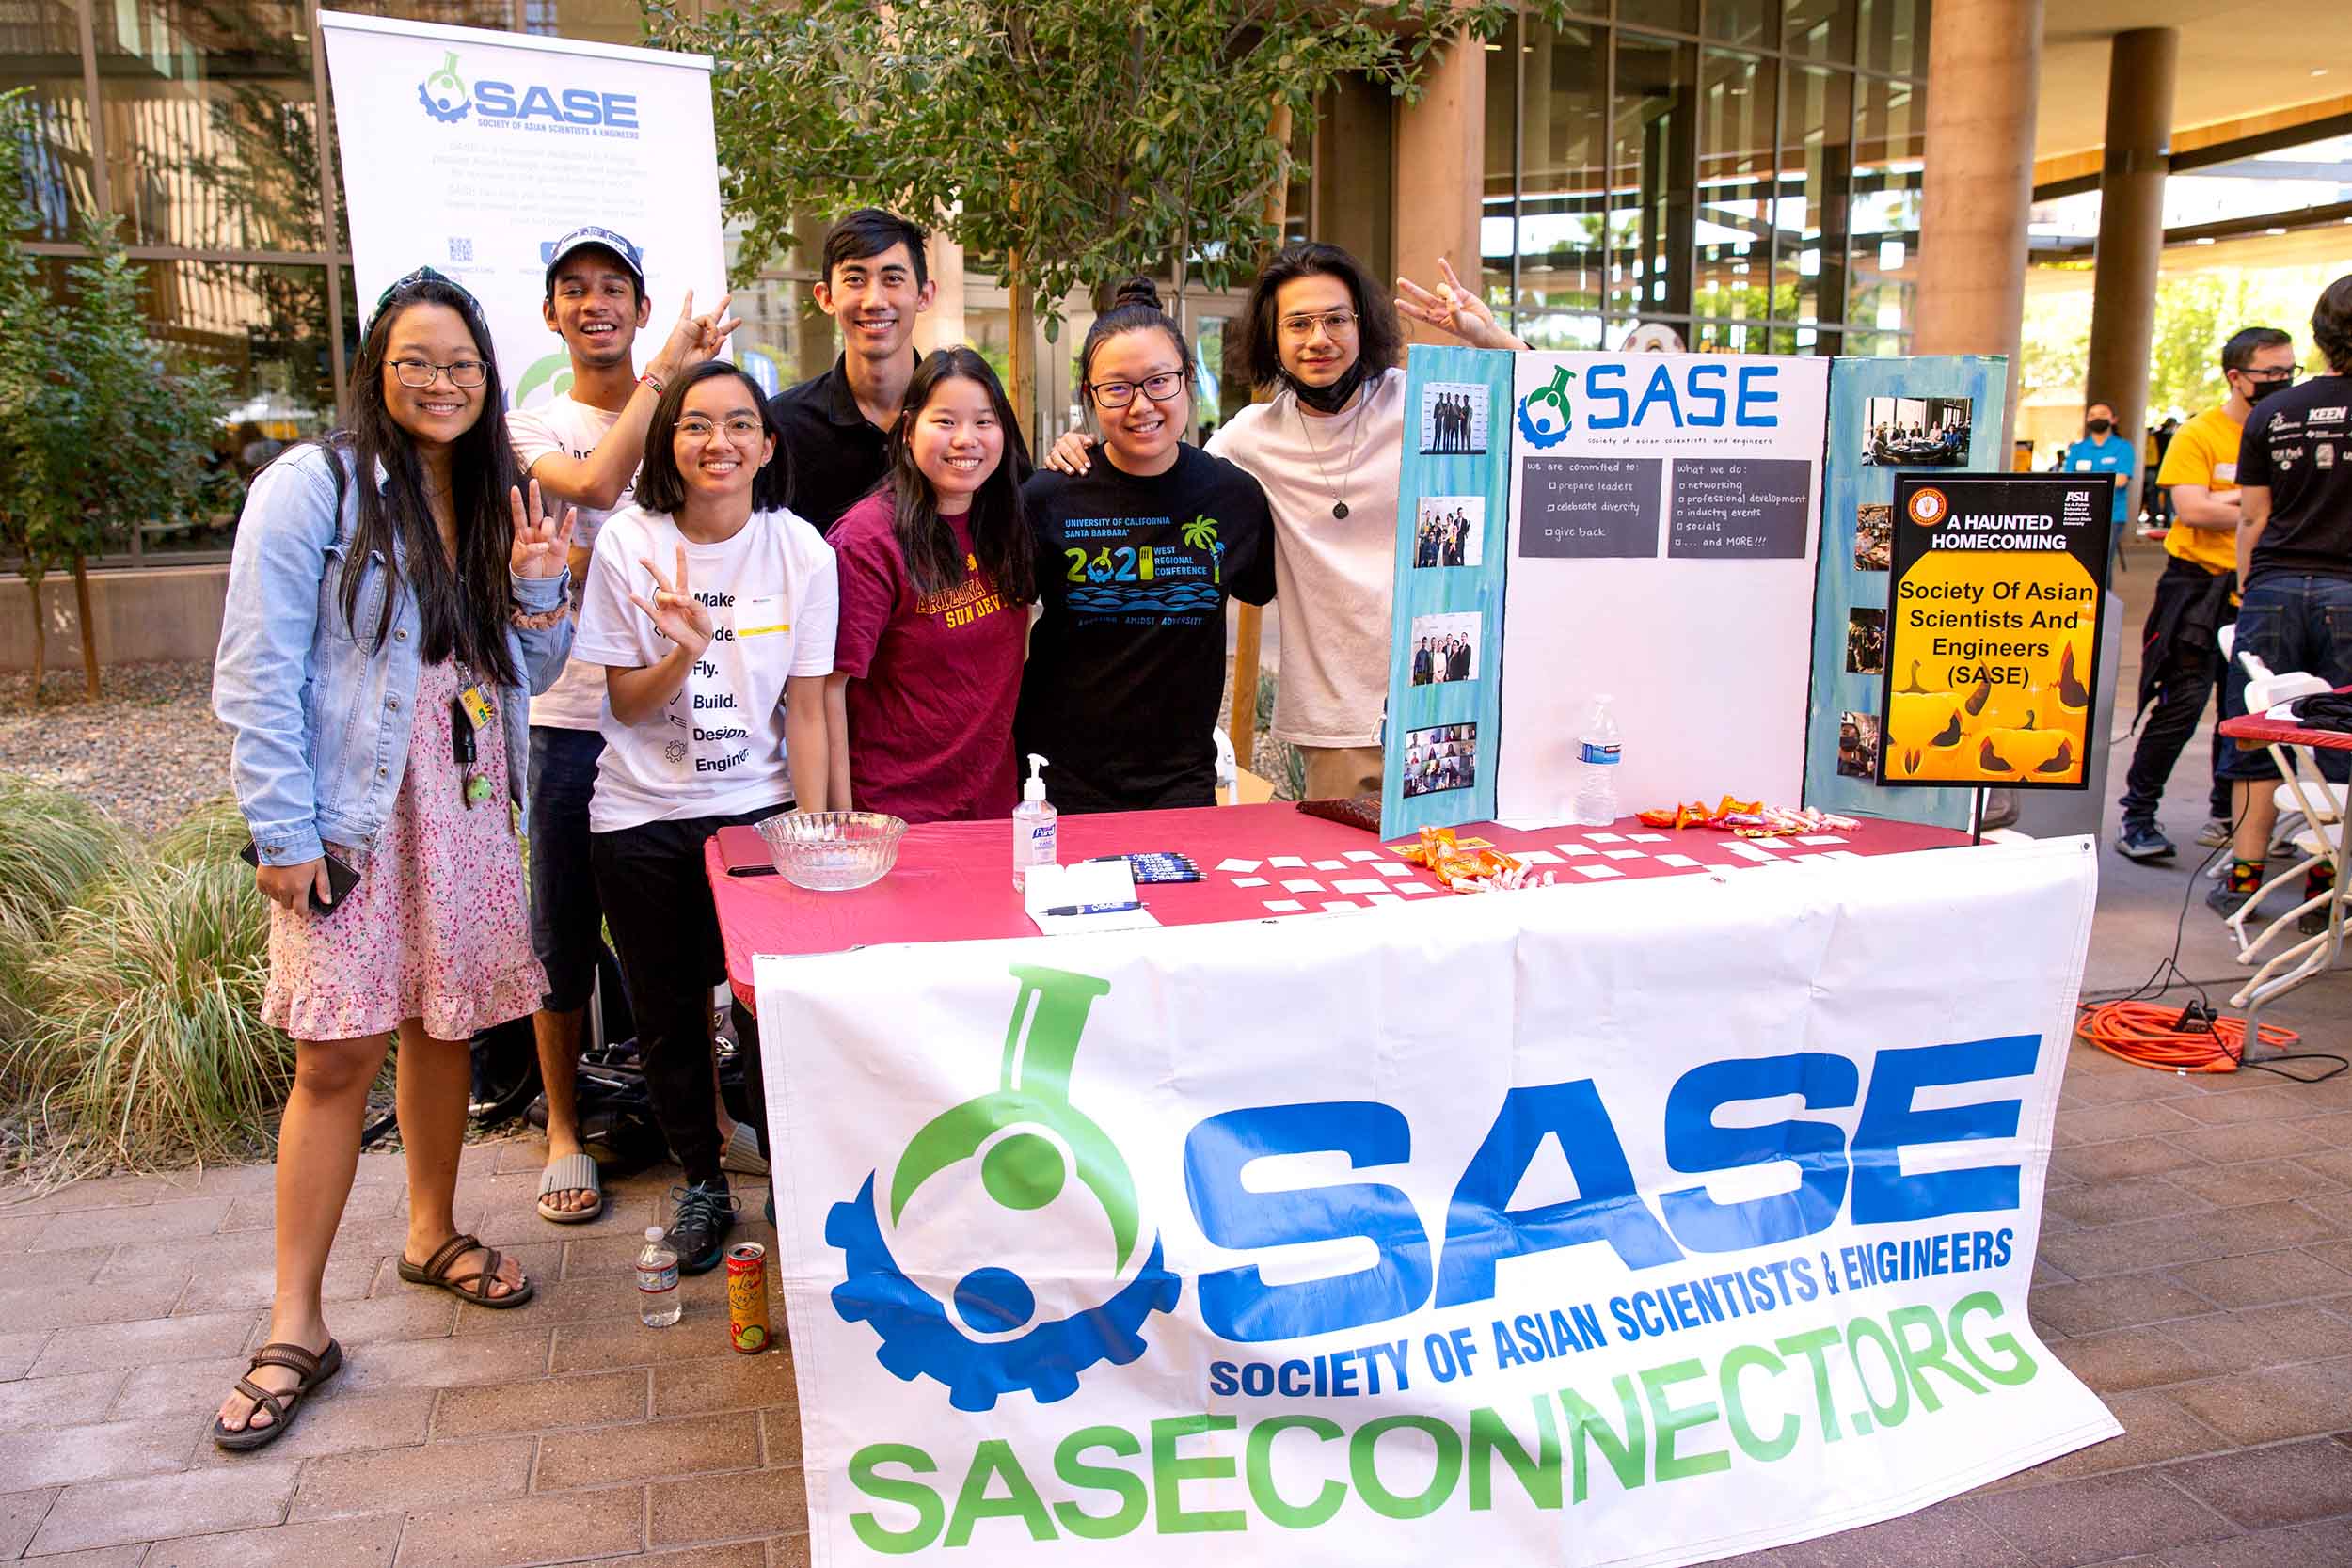 A group of Society of Asian Scientists & Engineers (SASE) members group together for a photo at their Block Party table.